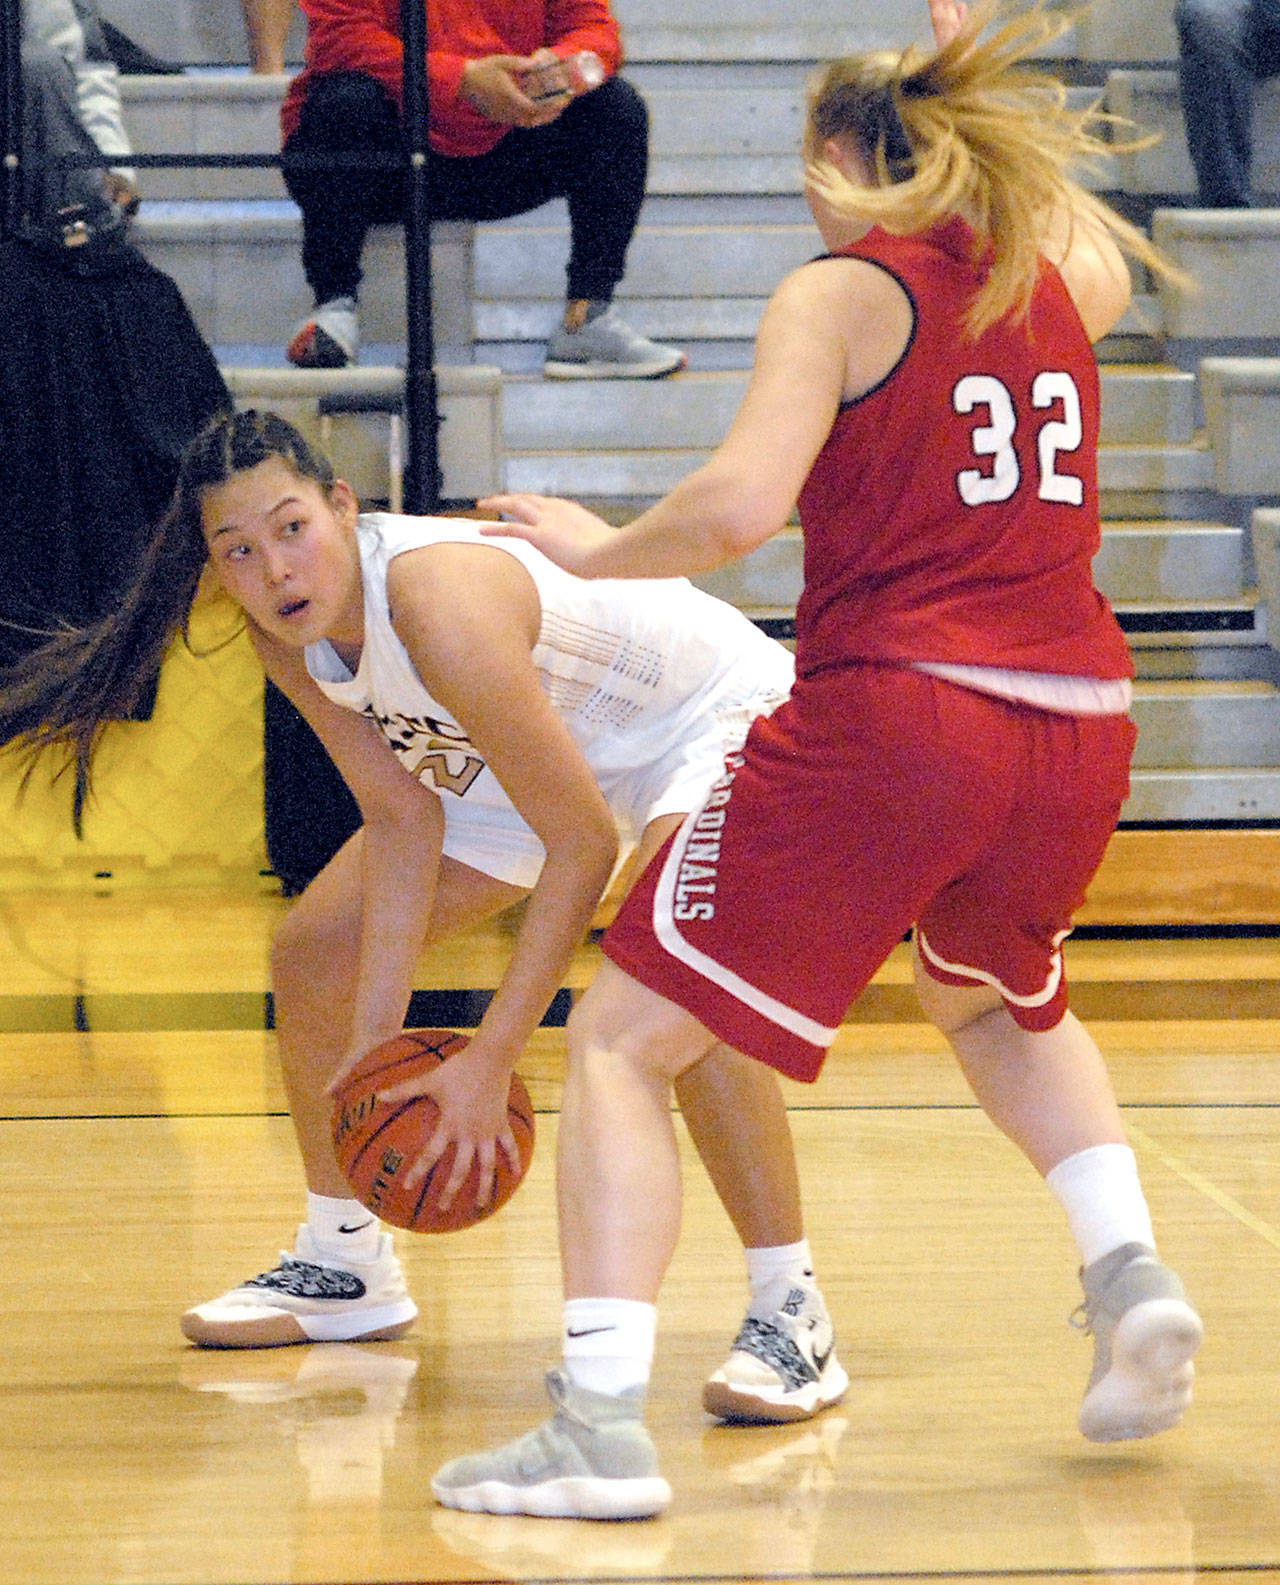 Keith Thorpe/Peninsula Daily News Peninsula’s Logan Luke, left, looks for a way around the defense of Skagit Valley’s Kaitlyn Meek, a graduate of Port Townsend High School, during Wednesday night’s game in Port Angeles.